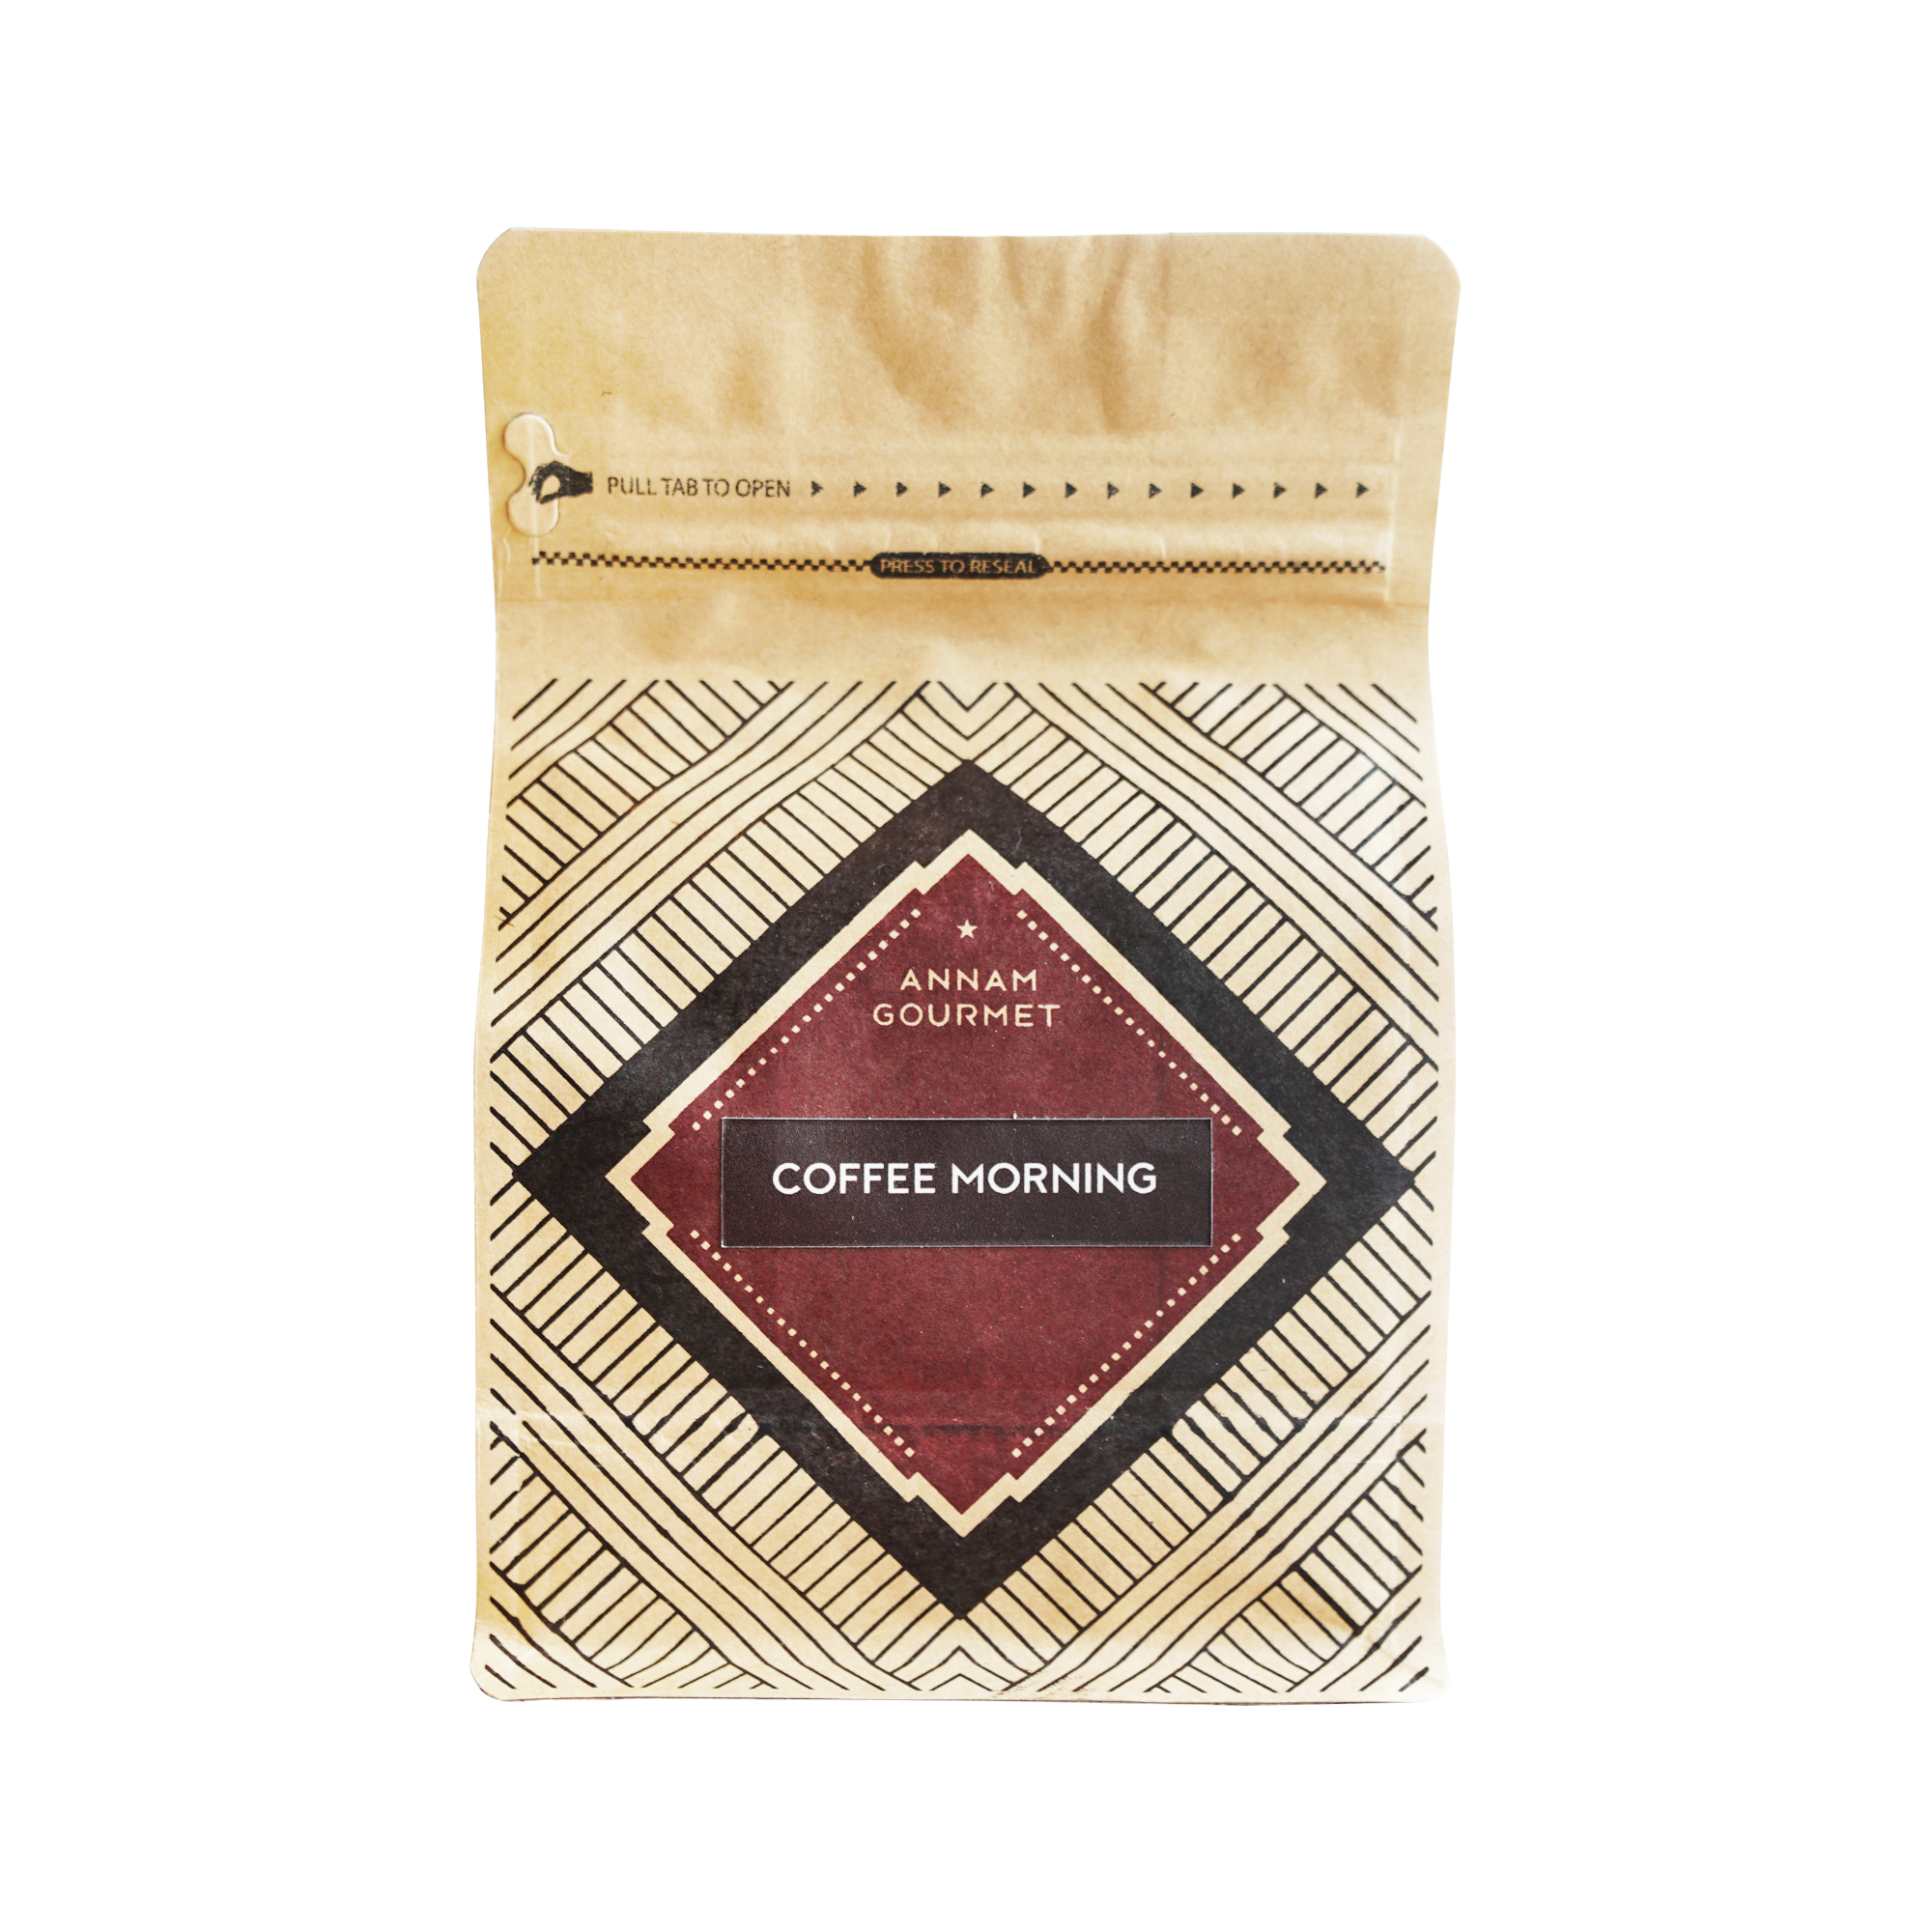 AG Signature Coffee Morning (250g)